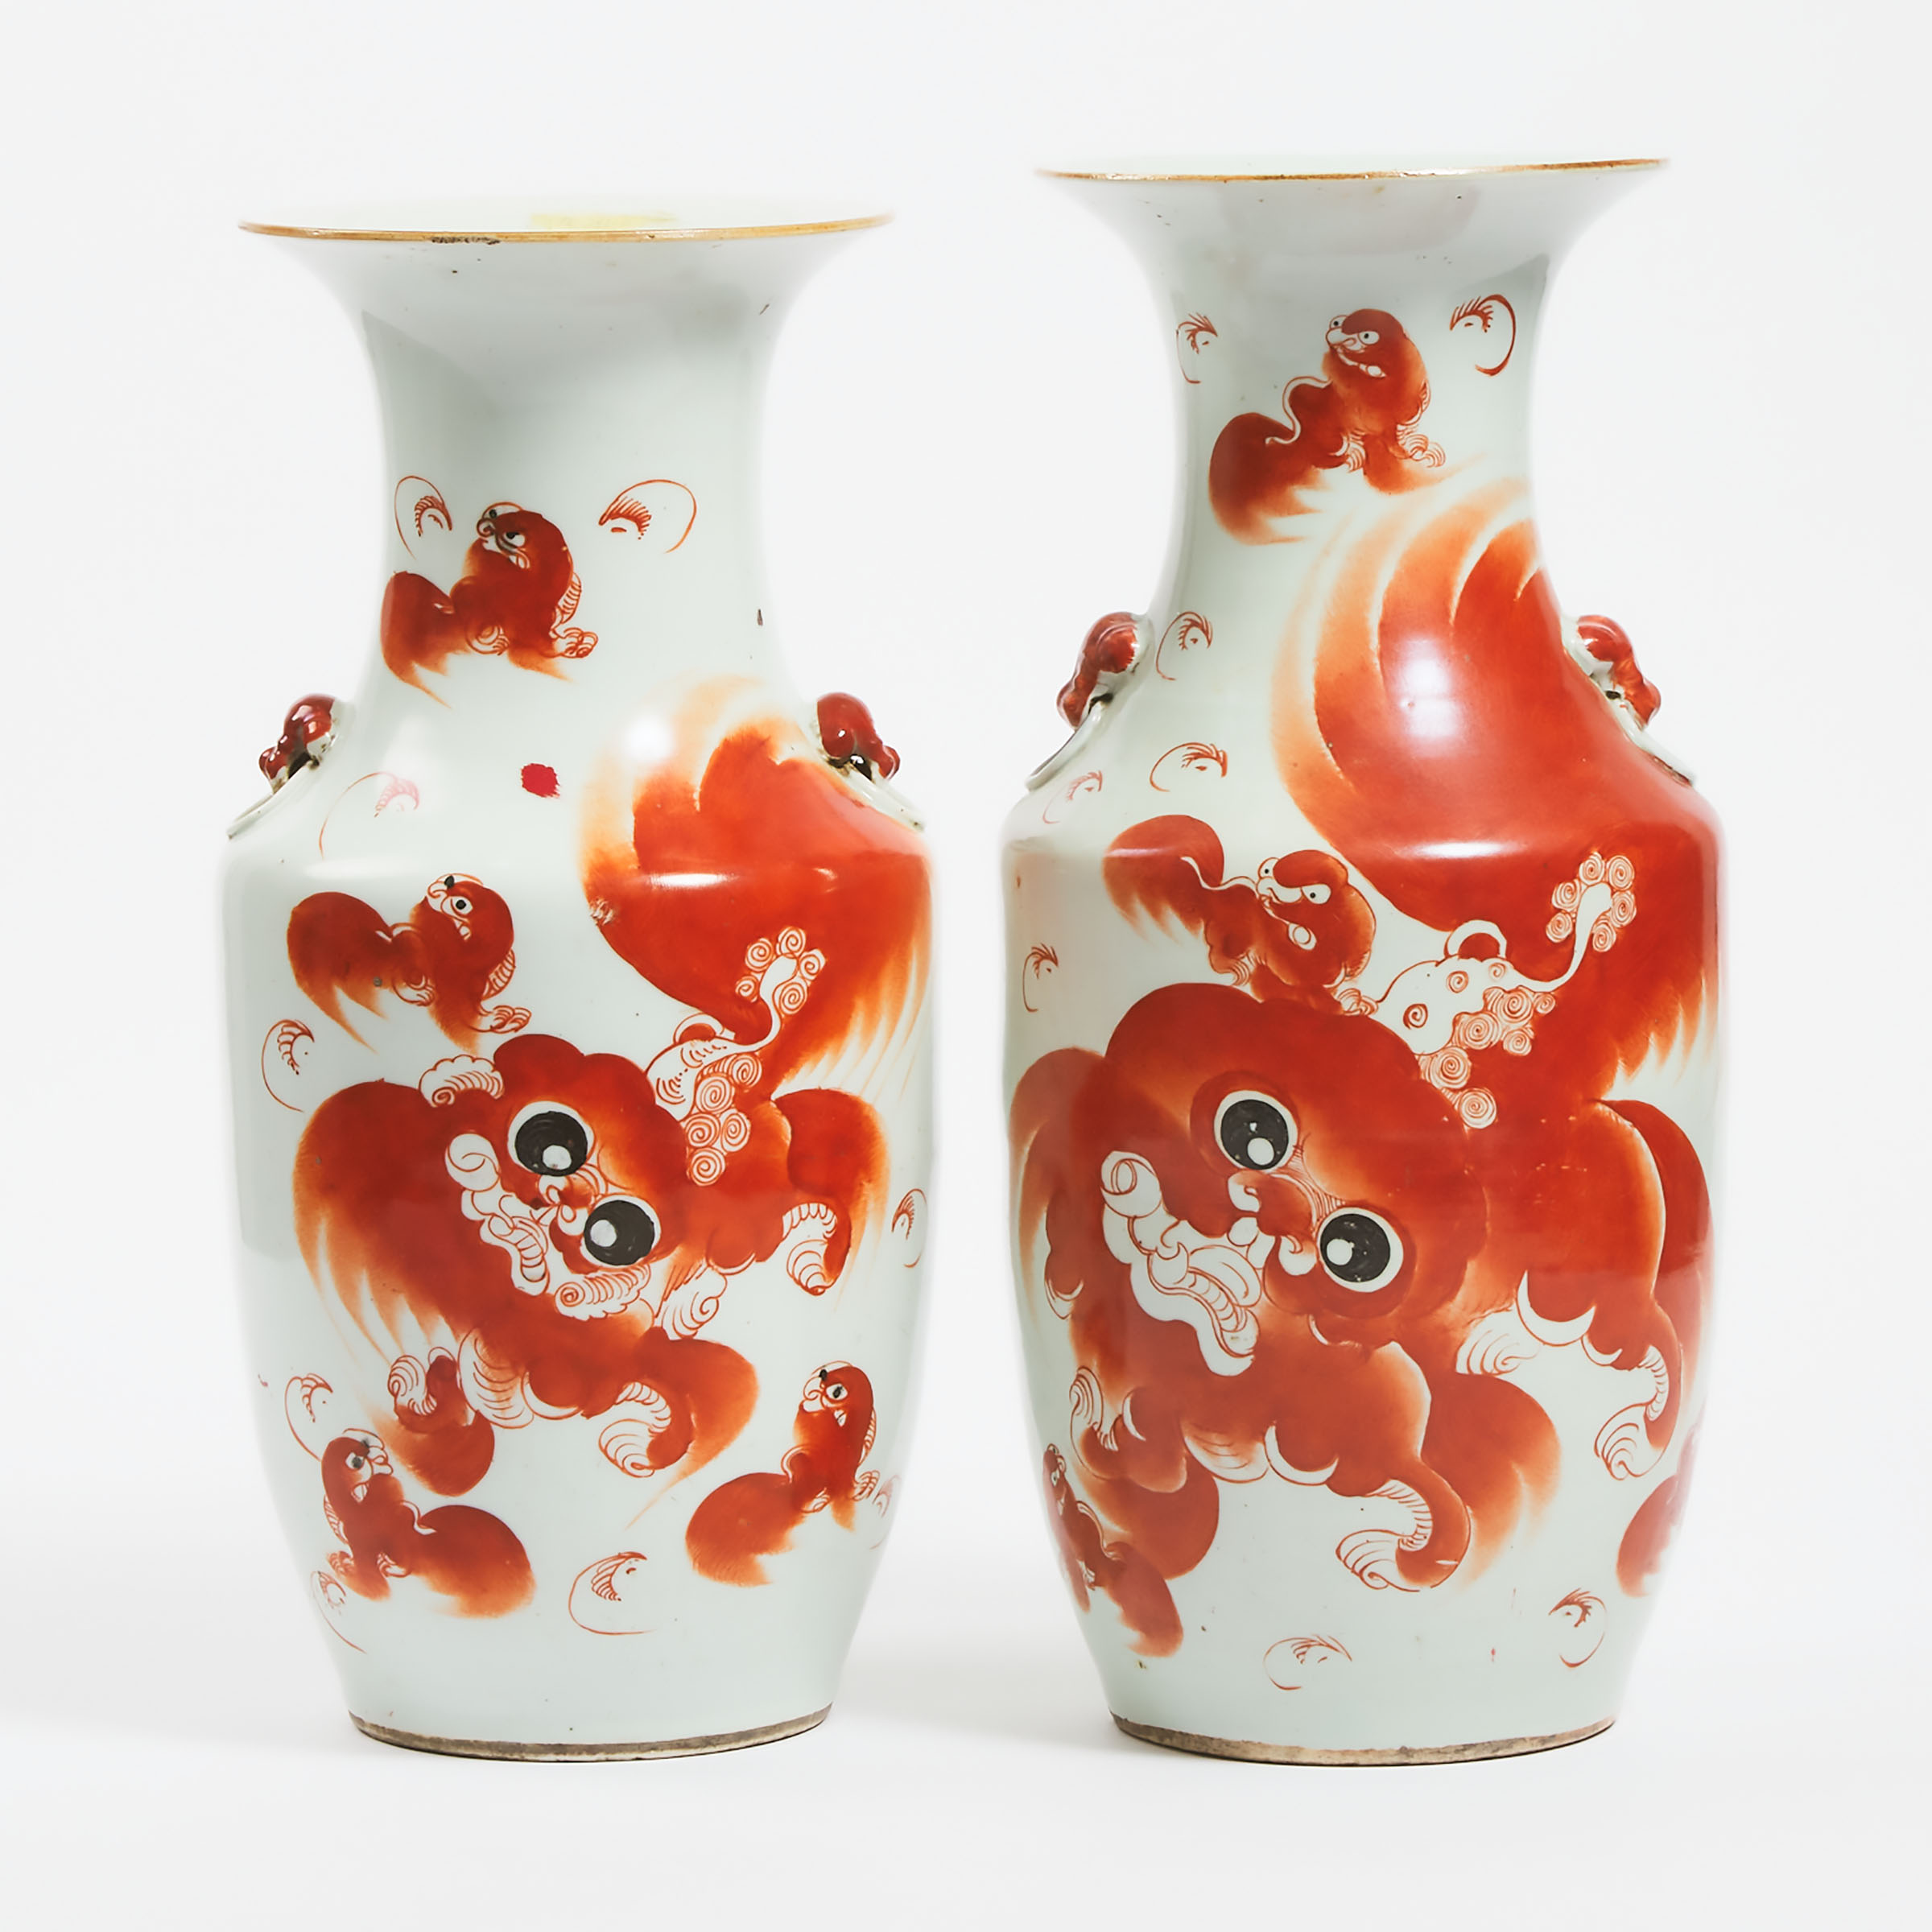 Two Iron Red 'Lions' Vases, Republican Period